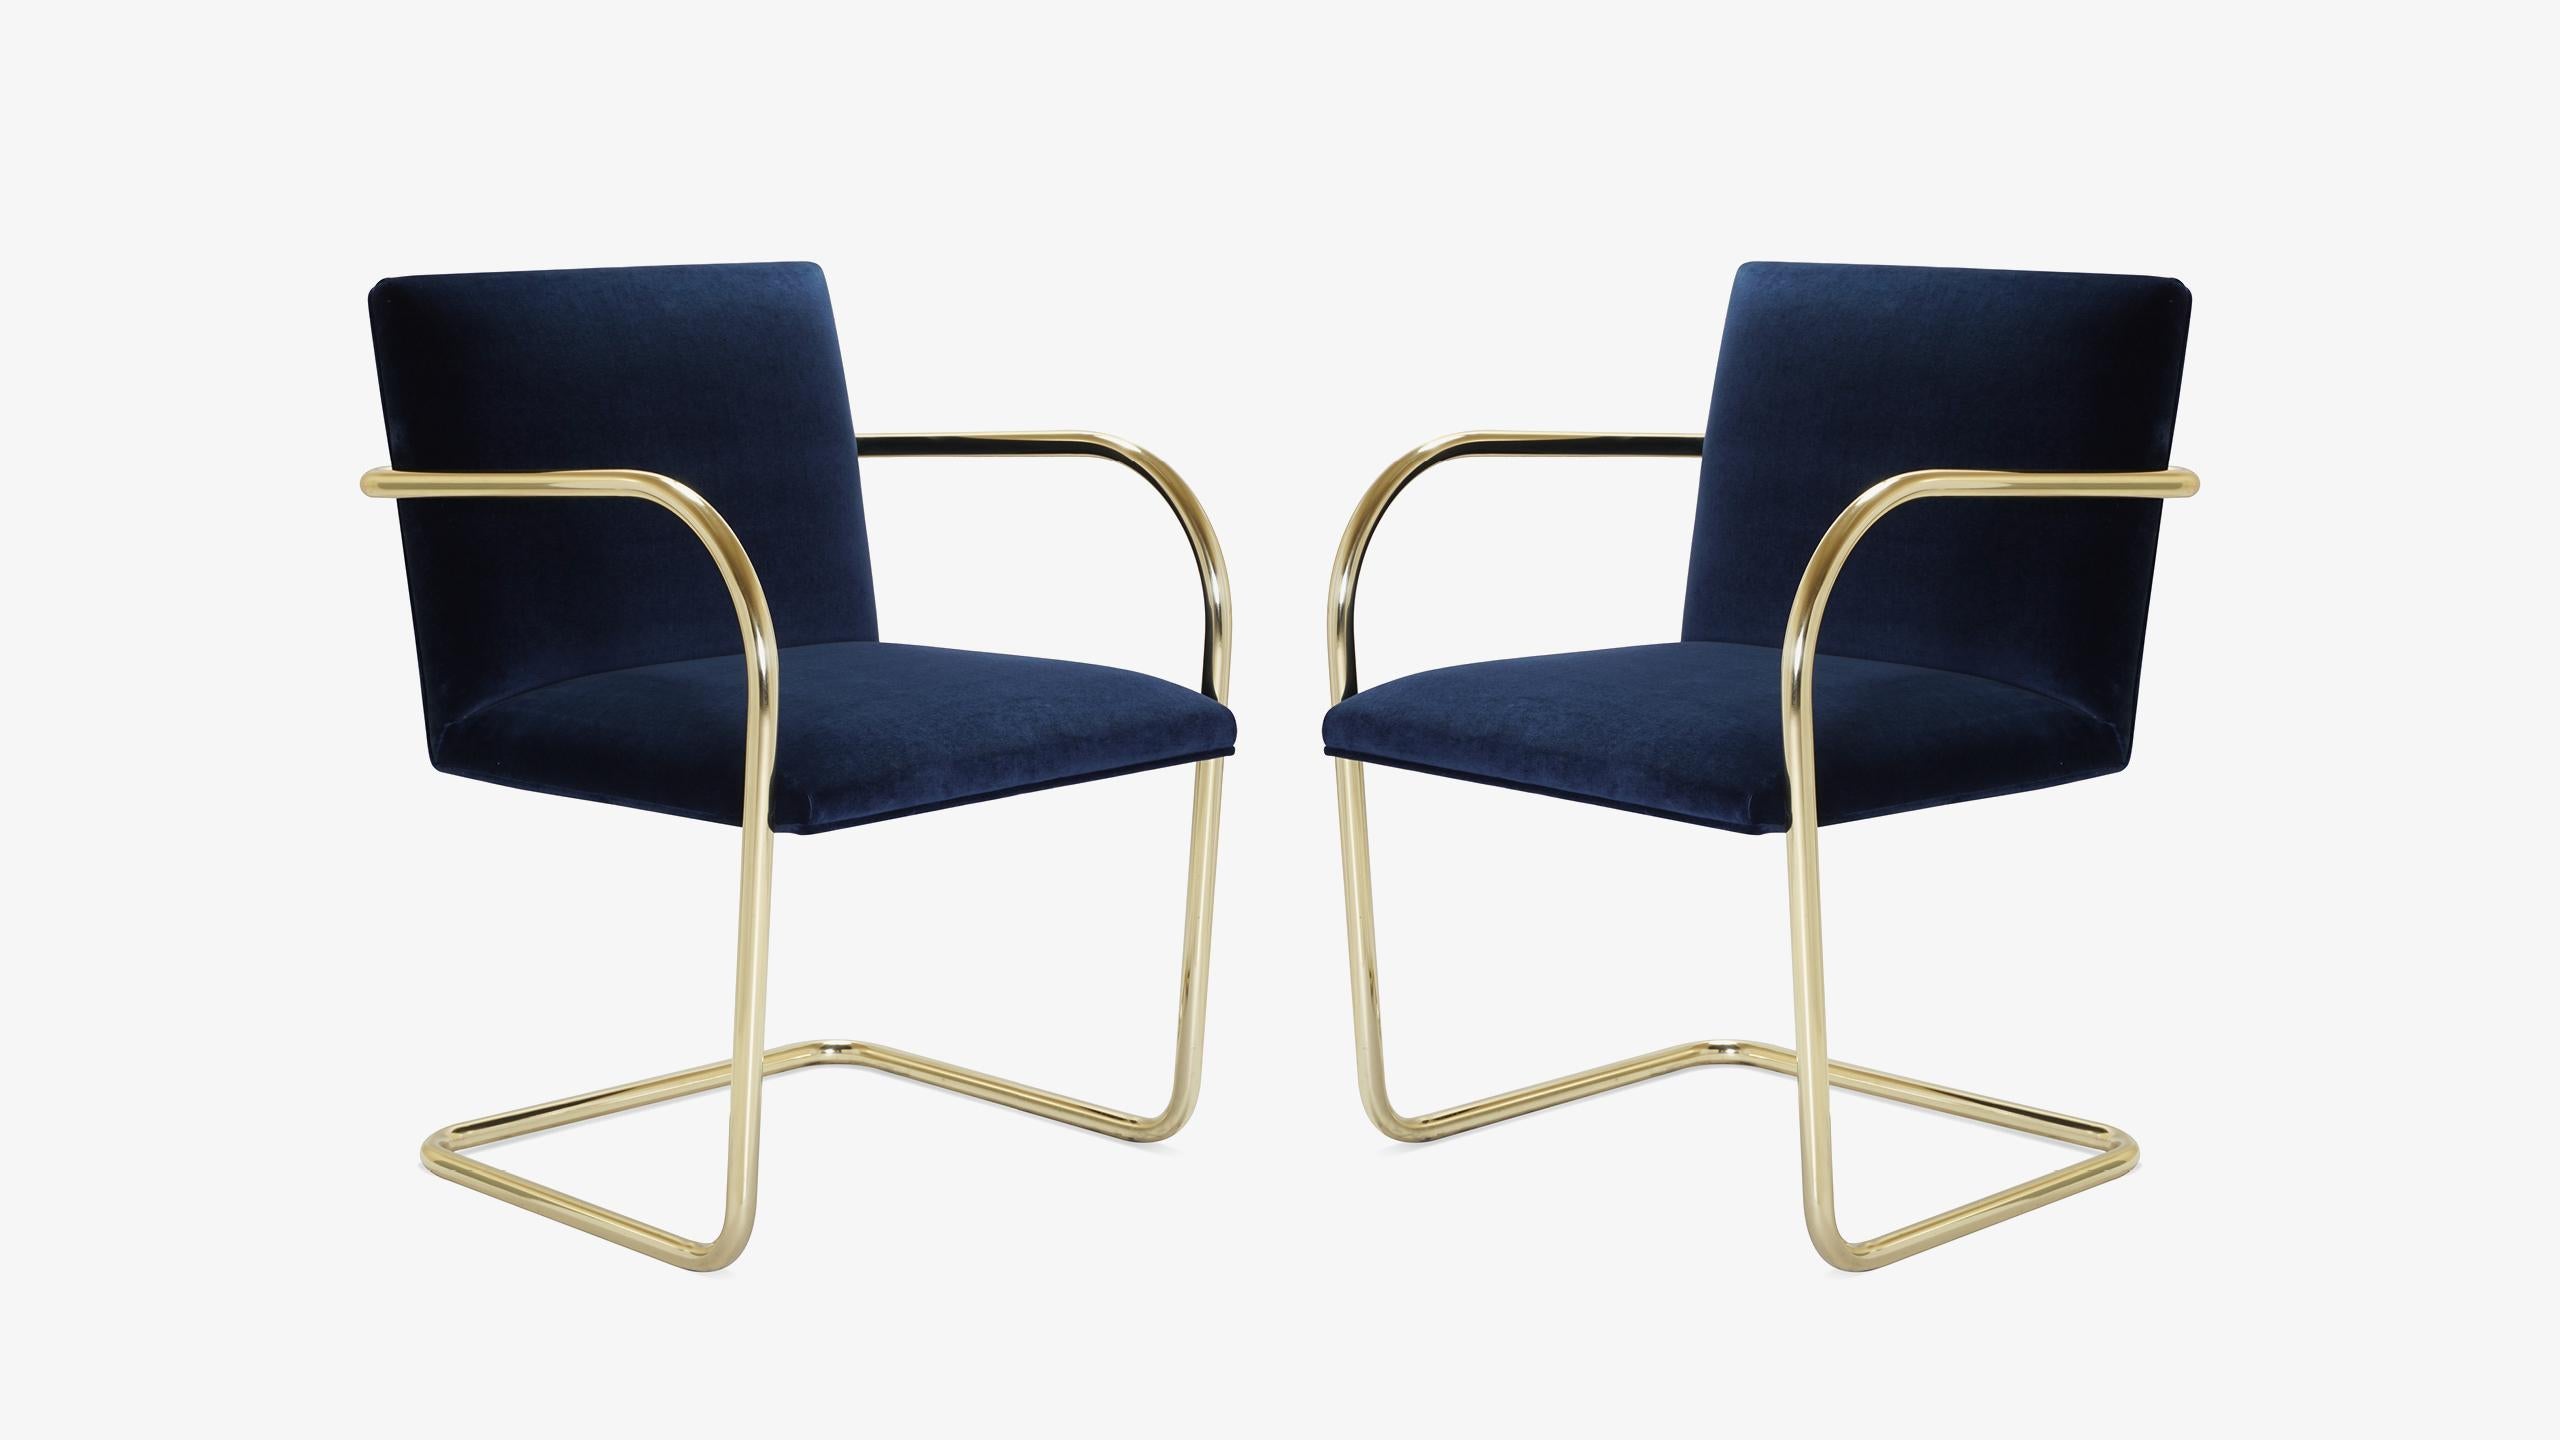 The definition of minimalism in a singular design, achieved by the great Ludwig Mies van der Rohe in 1929; the Brno Flat-Bar Chair is just that. We have edited these contemporary iteration authentic originals in a way that’s never been done